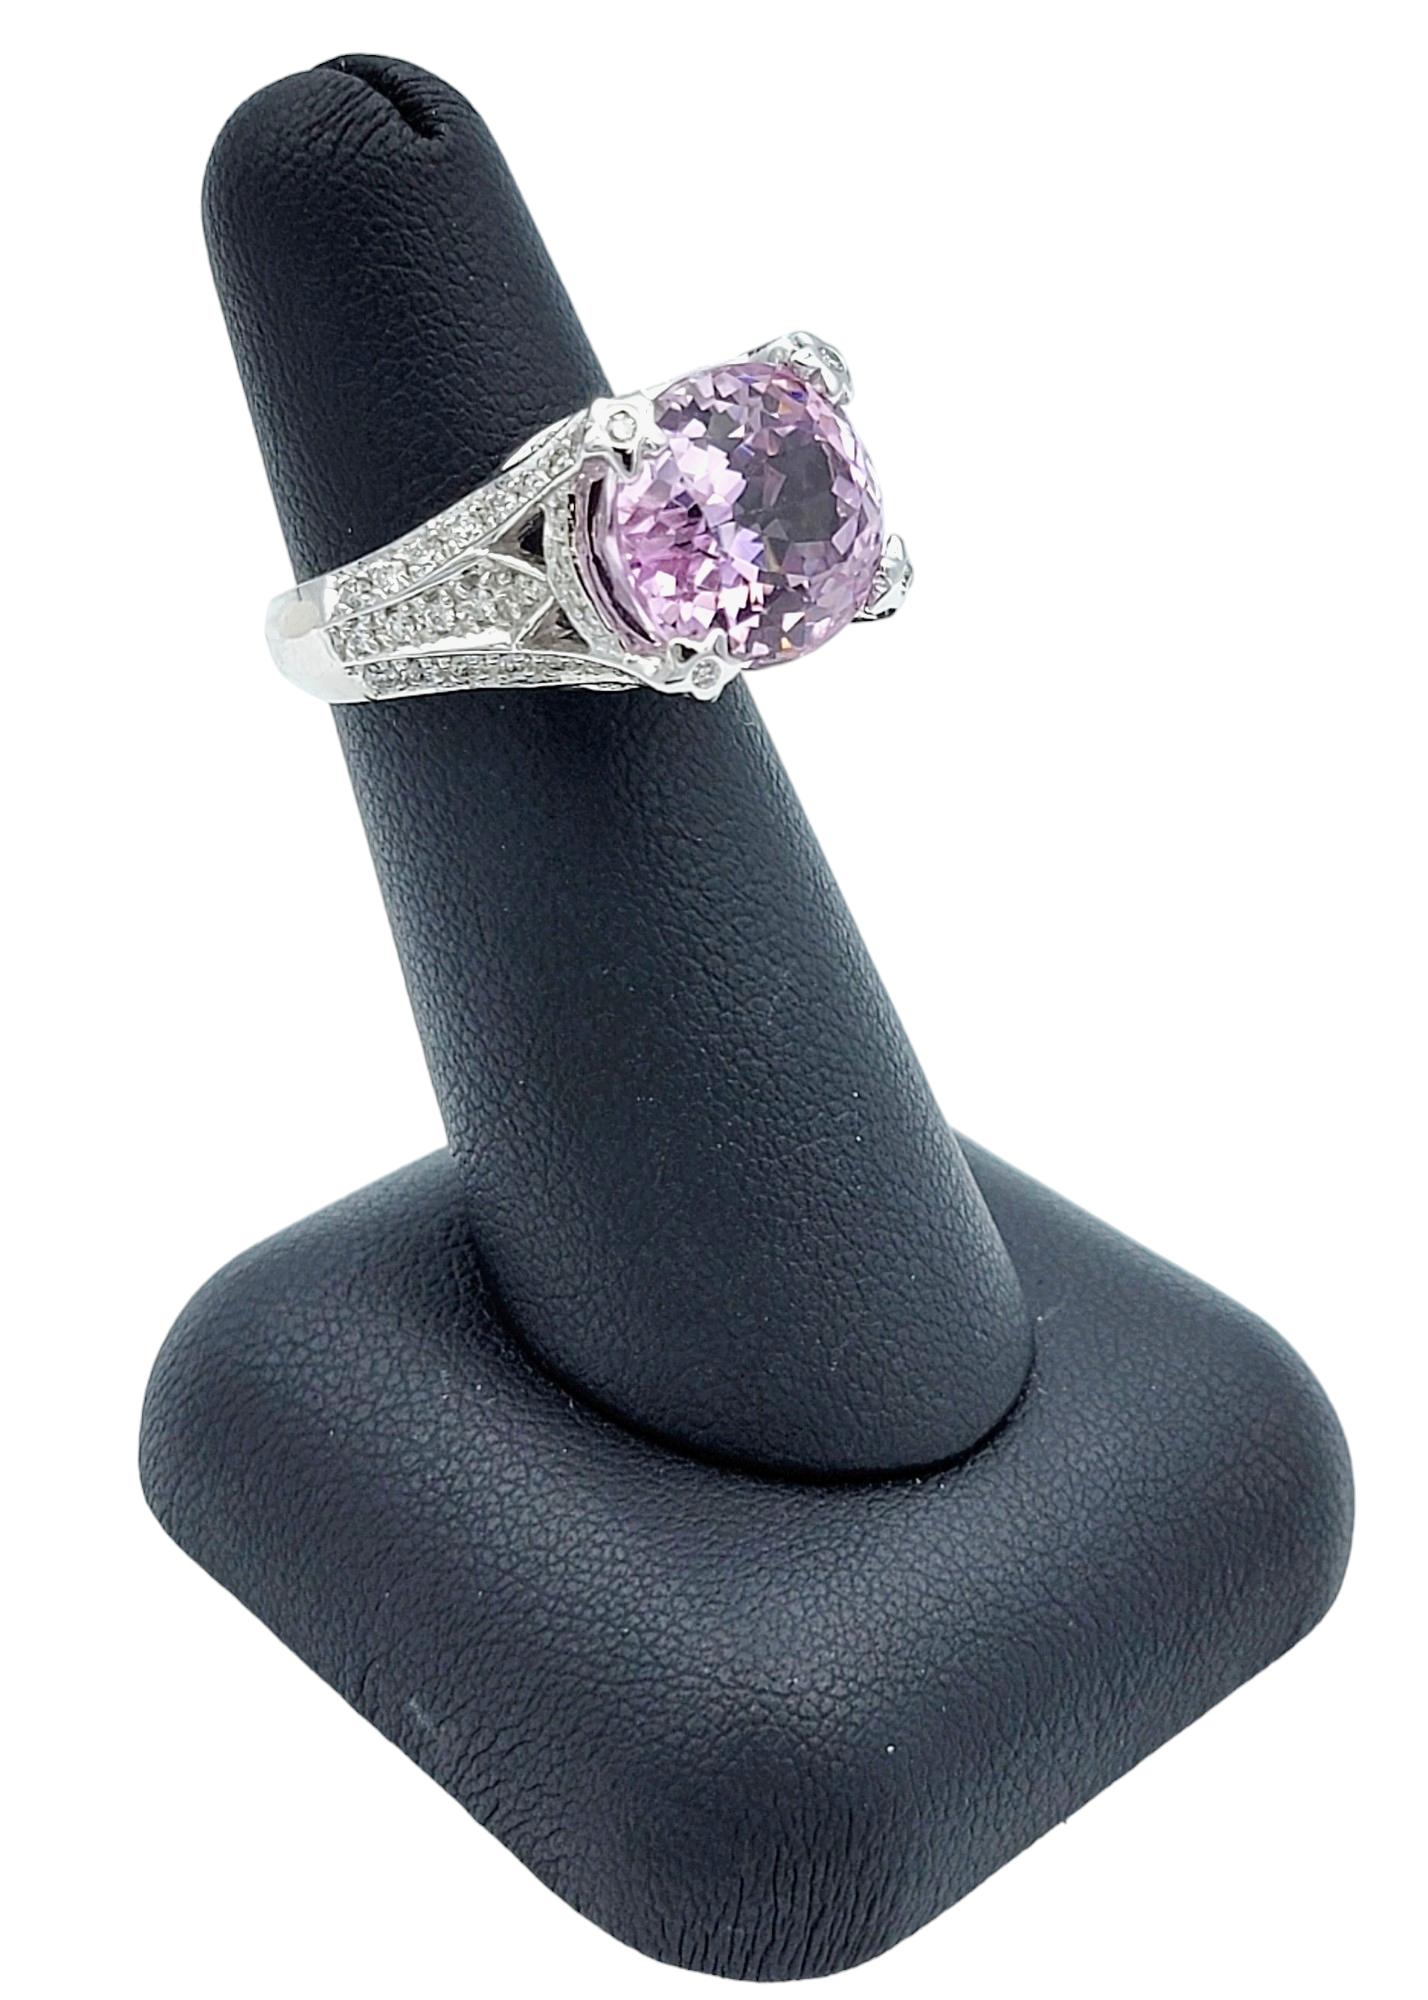 Sonia B. Oval Cut Pink Kunzite Ring with Pave Diamonds in 14 Karat White Gold For Sale 4